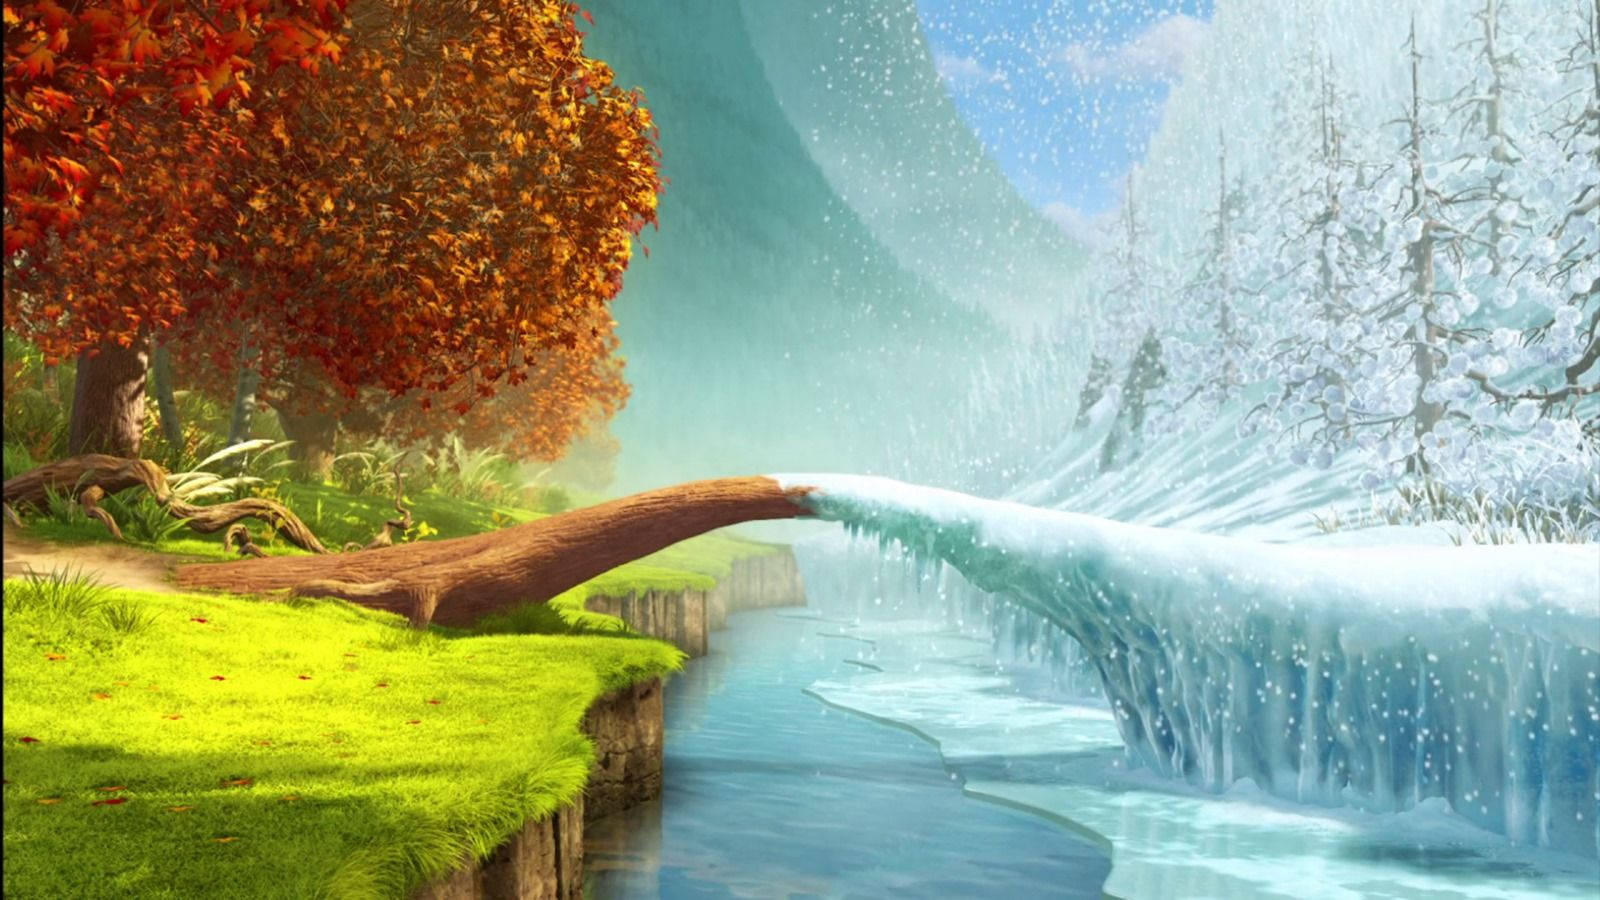 Disney wallpaper of Tinkerbell film with boundary between Pixie Hollow and Winter Woods